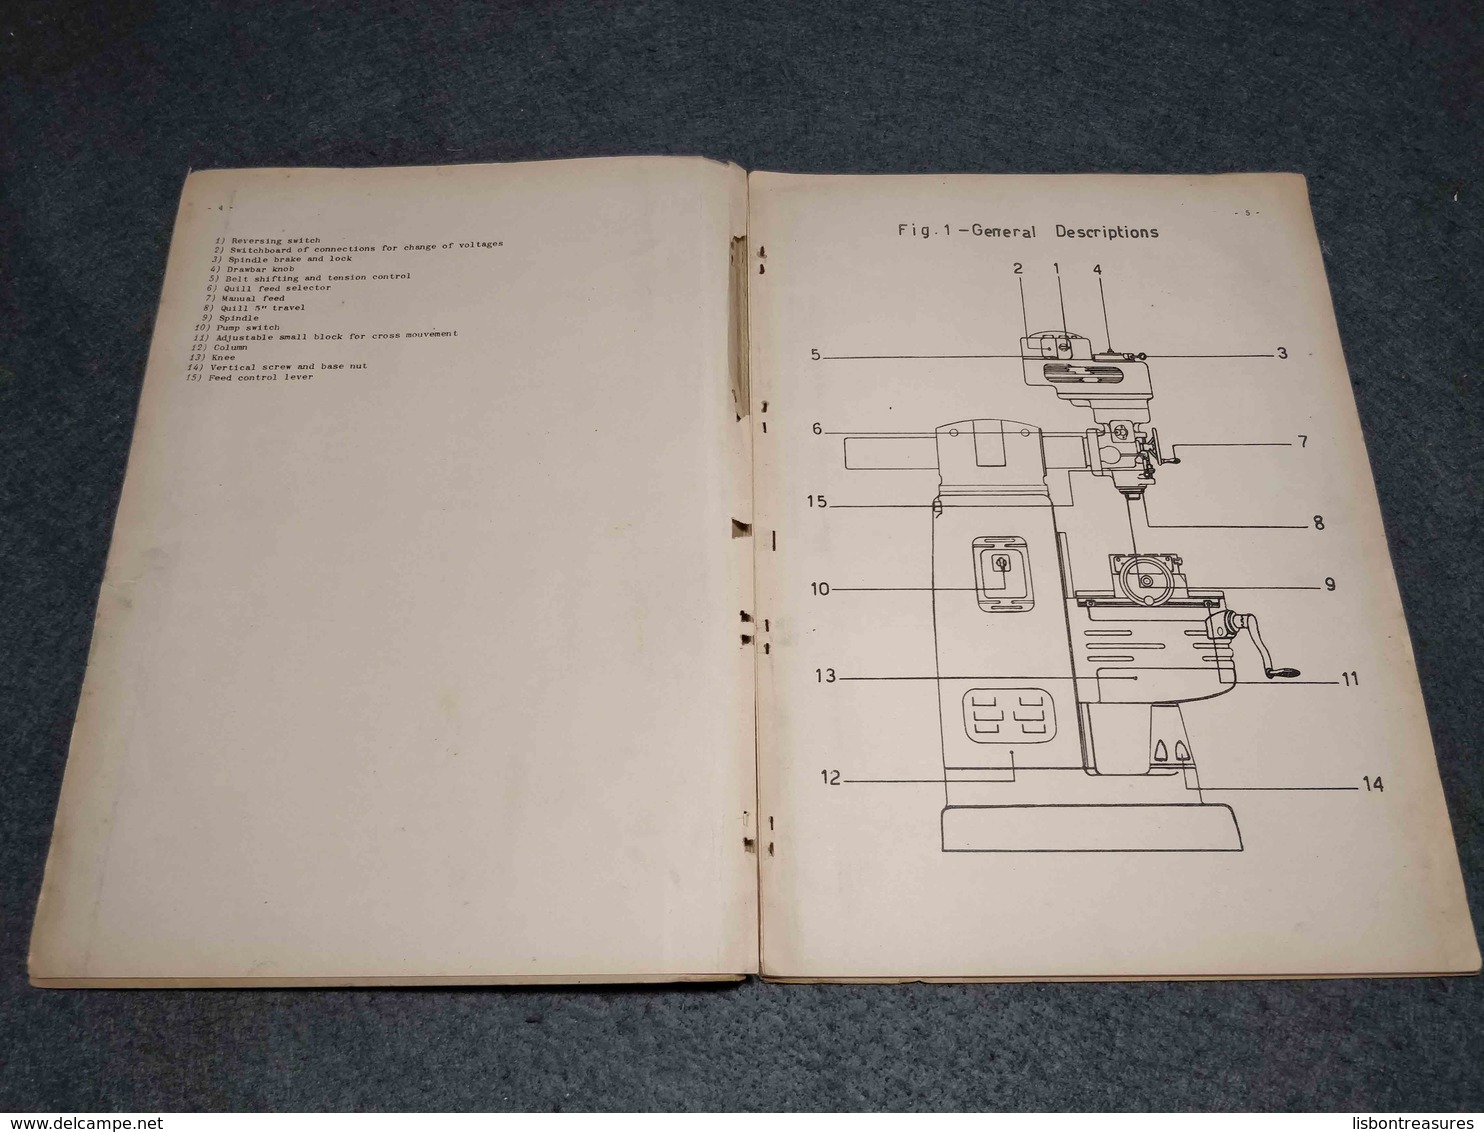 VERY RARE INDUMA VERTICAL TURRET MILLING MACHINE SERVICE MANUAL AND REPAIR PARTS - Supplies And Equipment